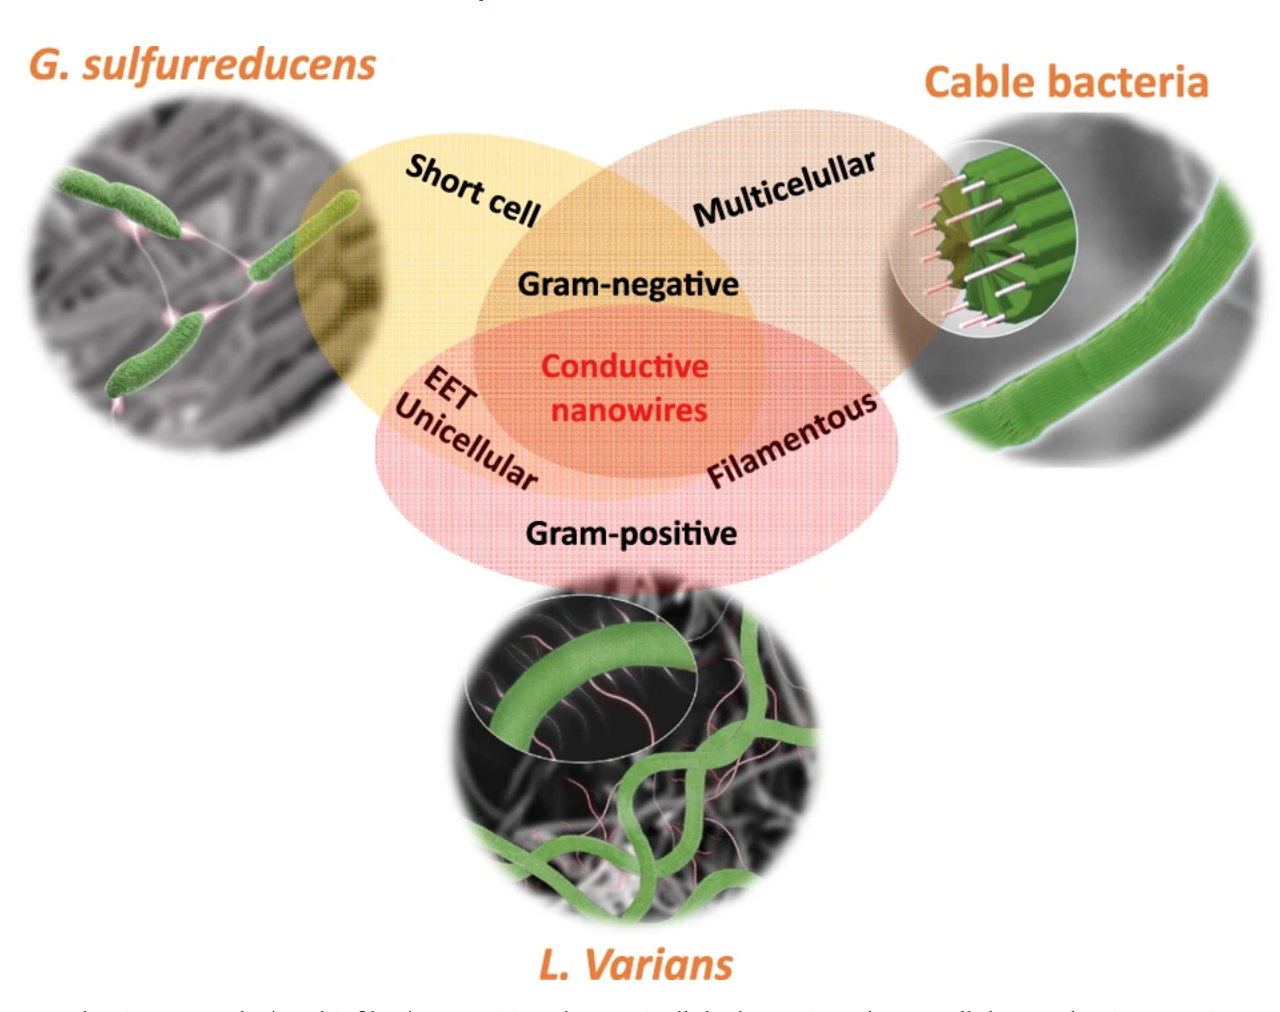 A comparison among the conductive networks of Geobacter, cable bacteria, and L. varians GY32. The newly discovered conductive networks of L. varians GY32 combines the filamentous shape with extracellular nanowire-like appendages to form a new type of netw